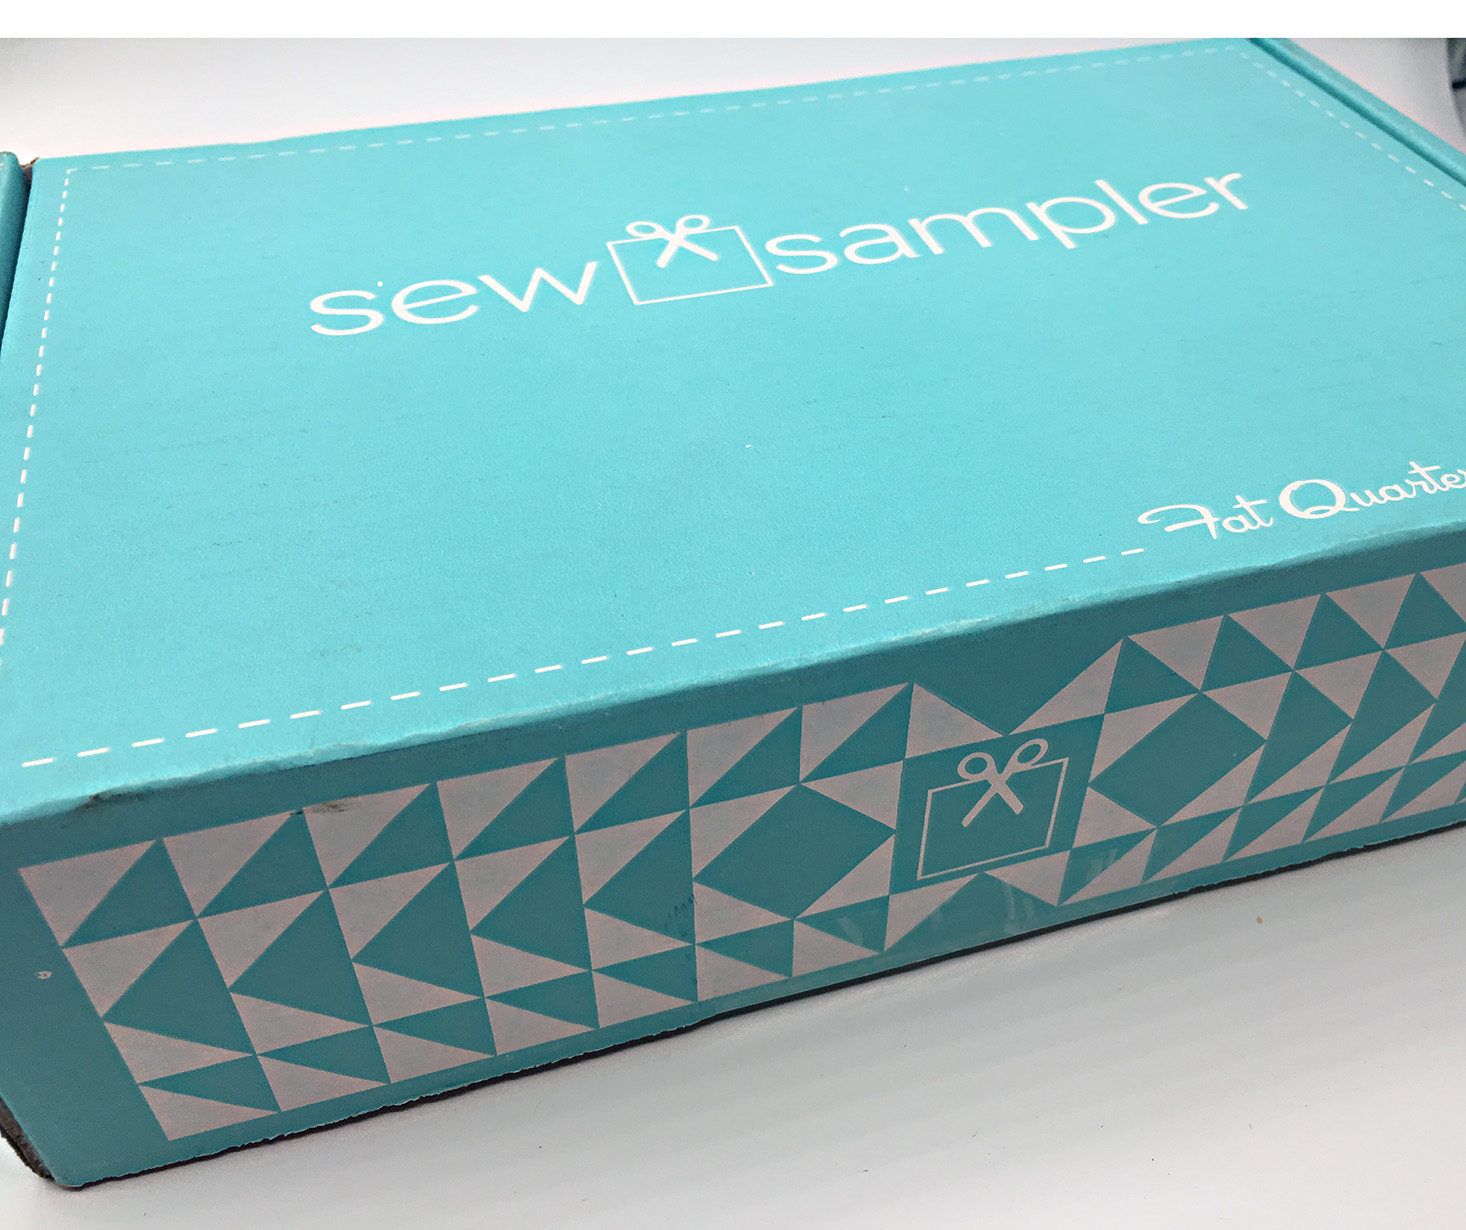 Sew Sampler Subscription Box Review – August 2016